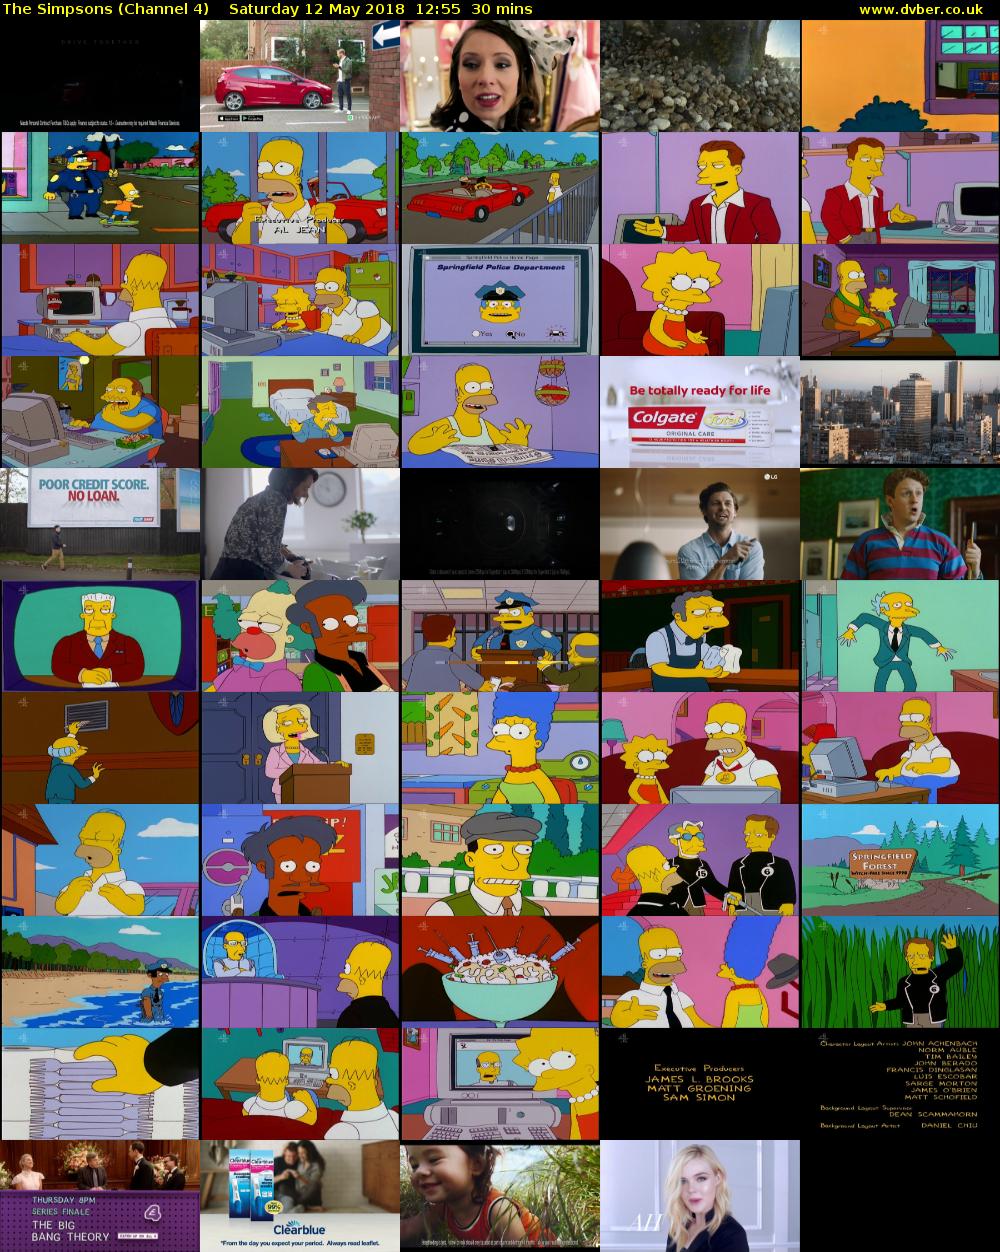 The Simpsons (Channel 4) Saturday 12 May 2018 12:55 - 13:25